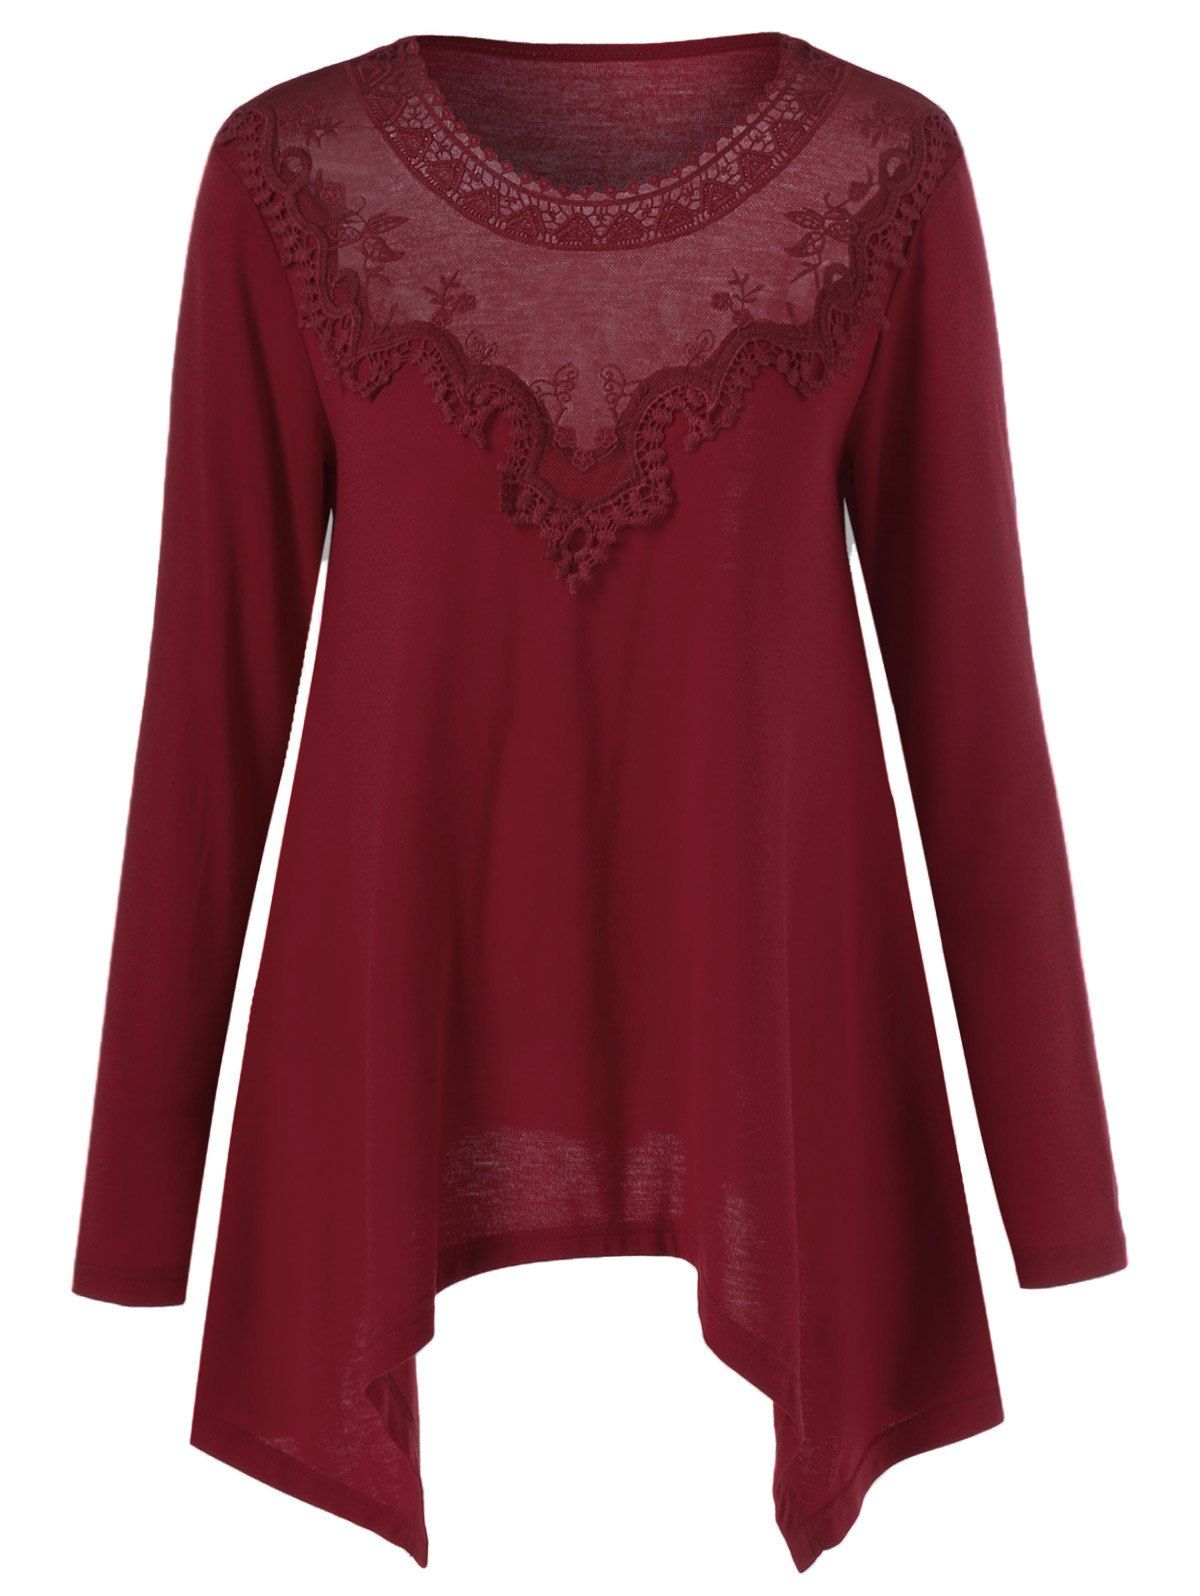 [41% OFF] 2020 Embroidered Trim Asymmetrical T-Shirt In DEEP RED ...